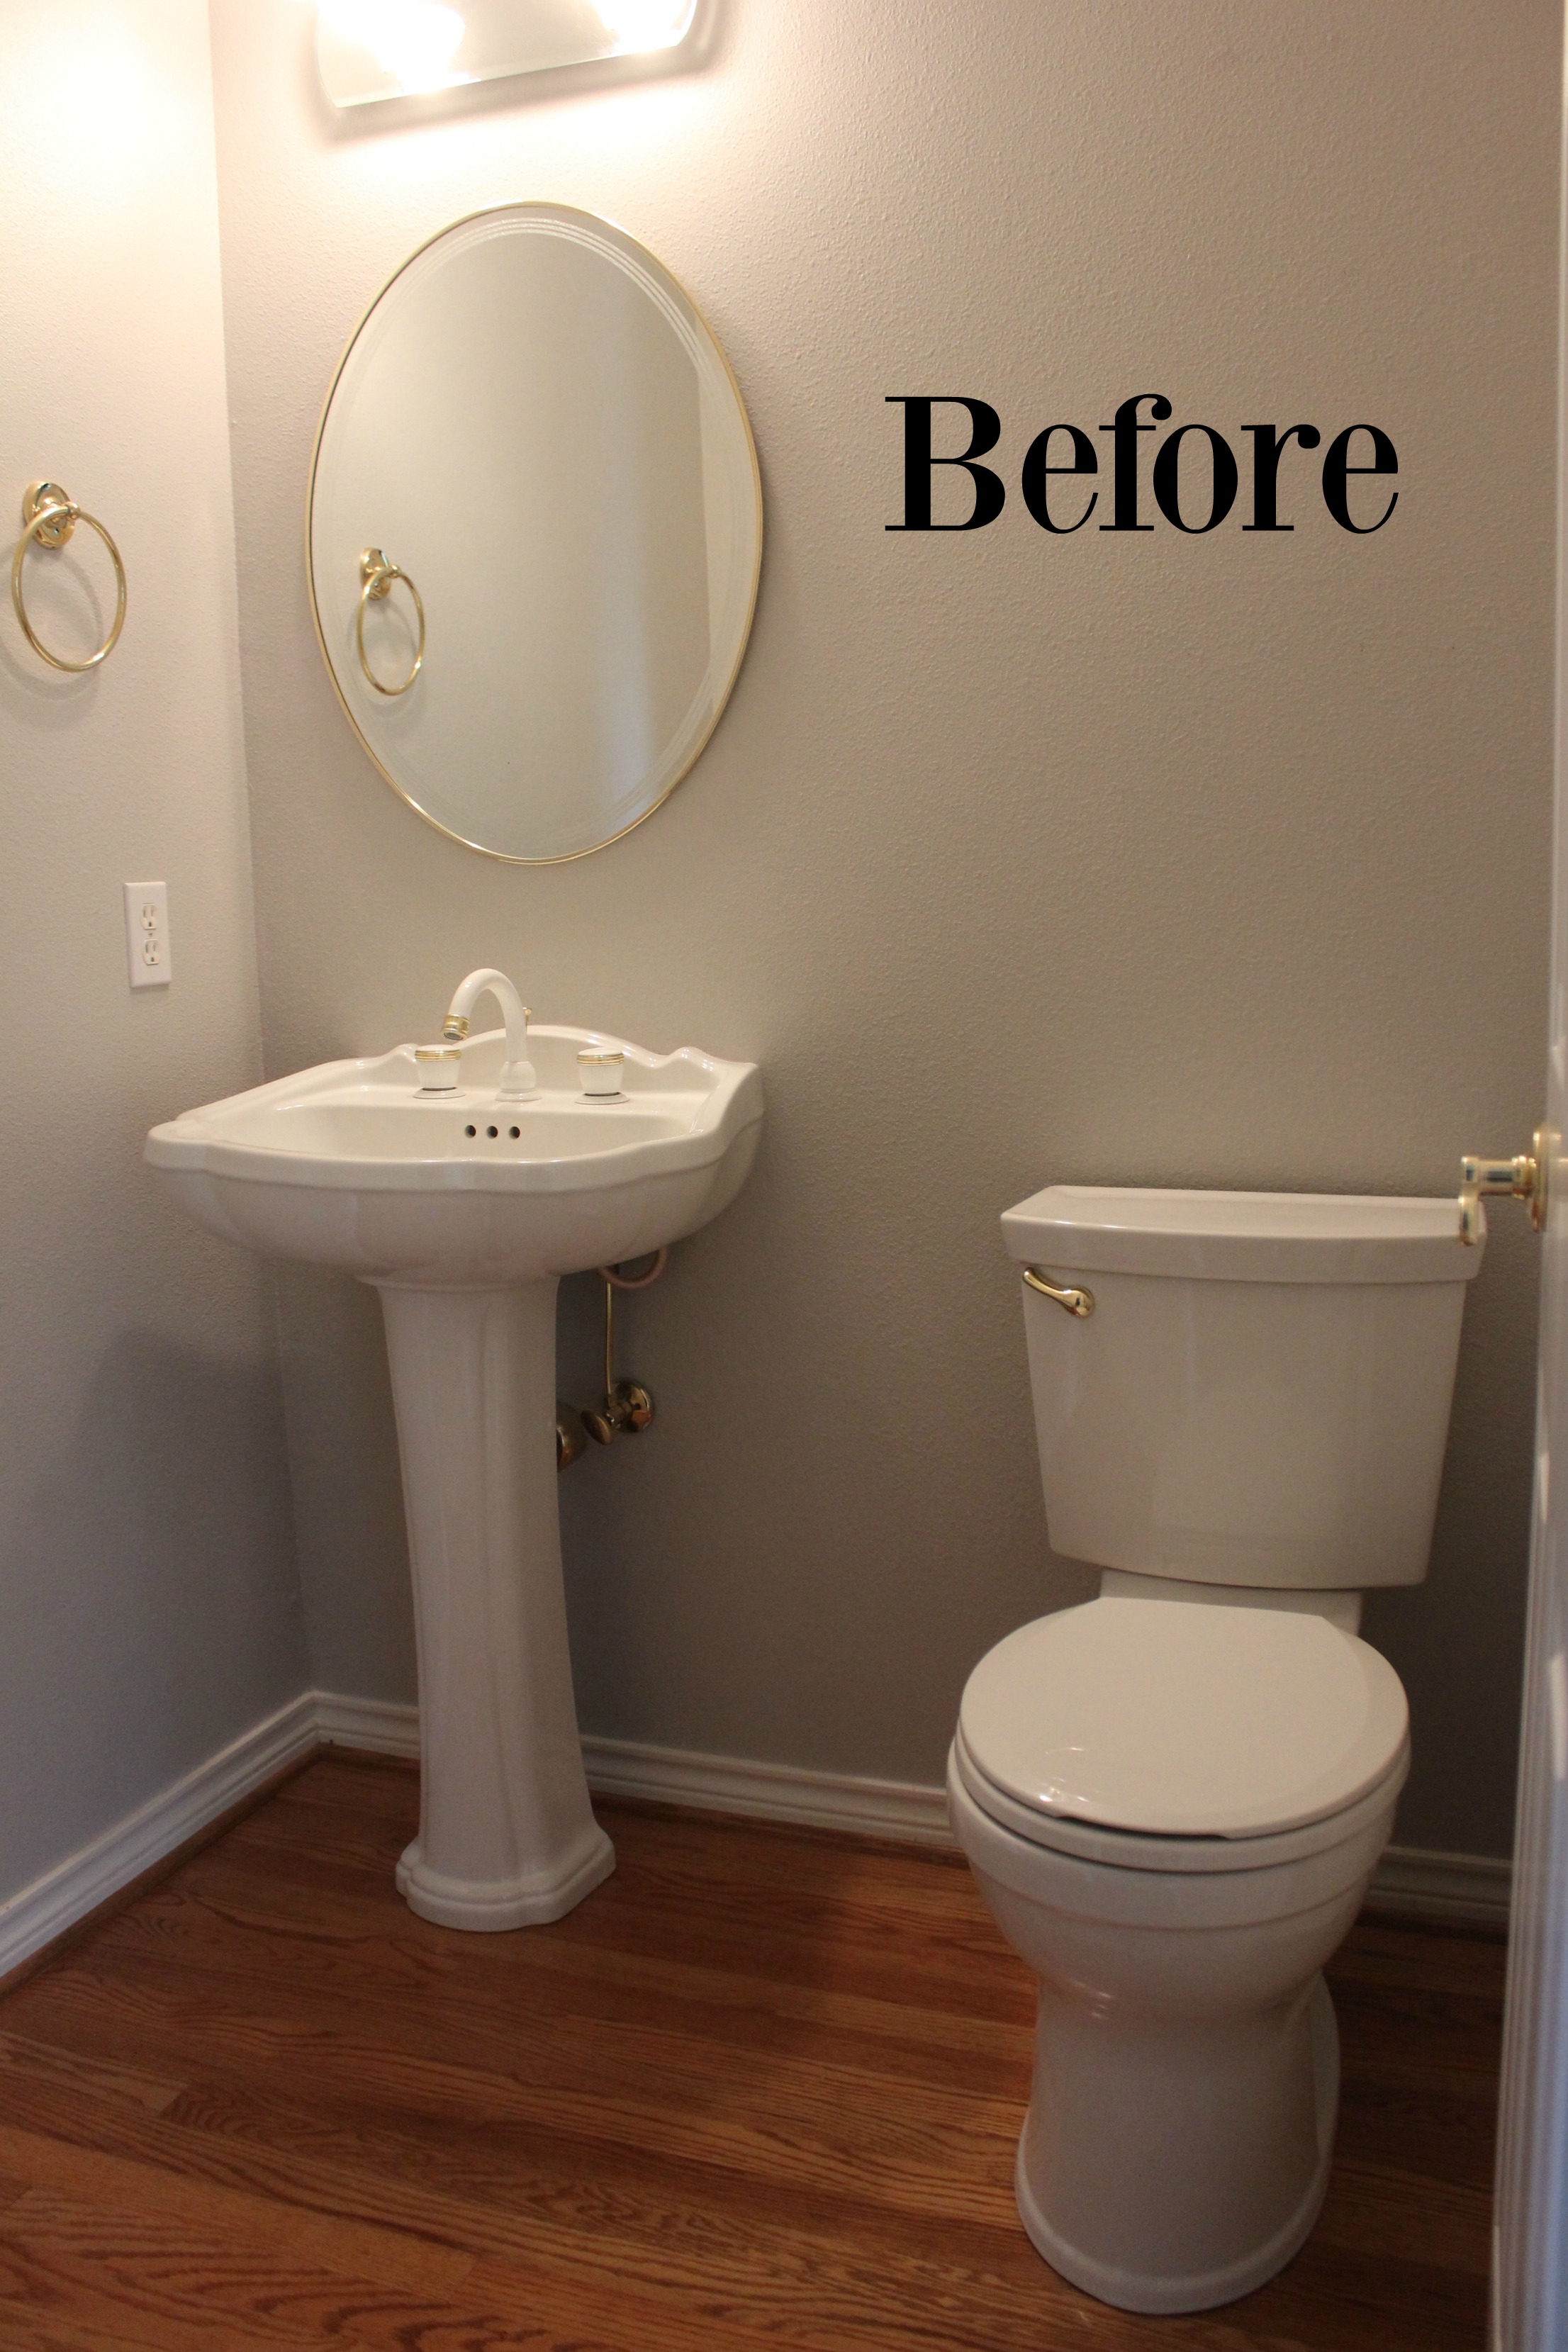 How To Make A Small Half Bathroom Look Larger - Best Design Idea